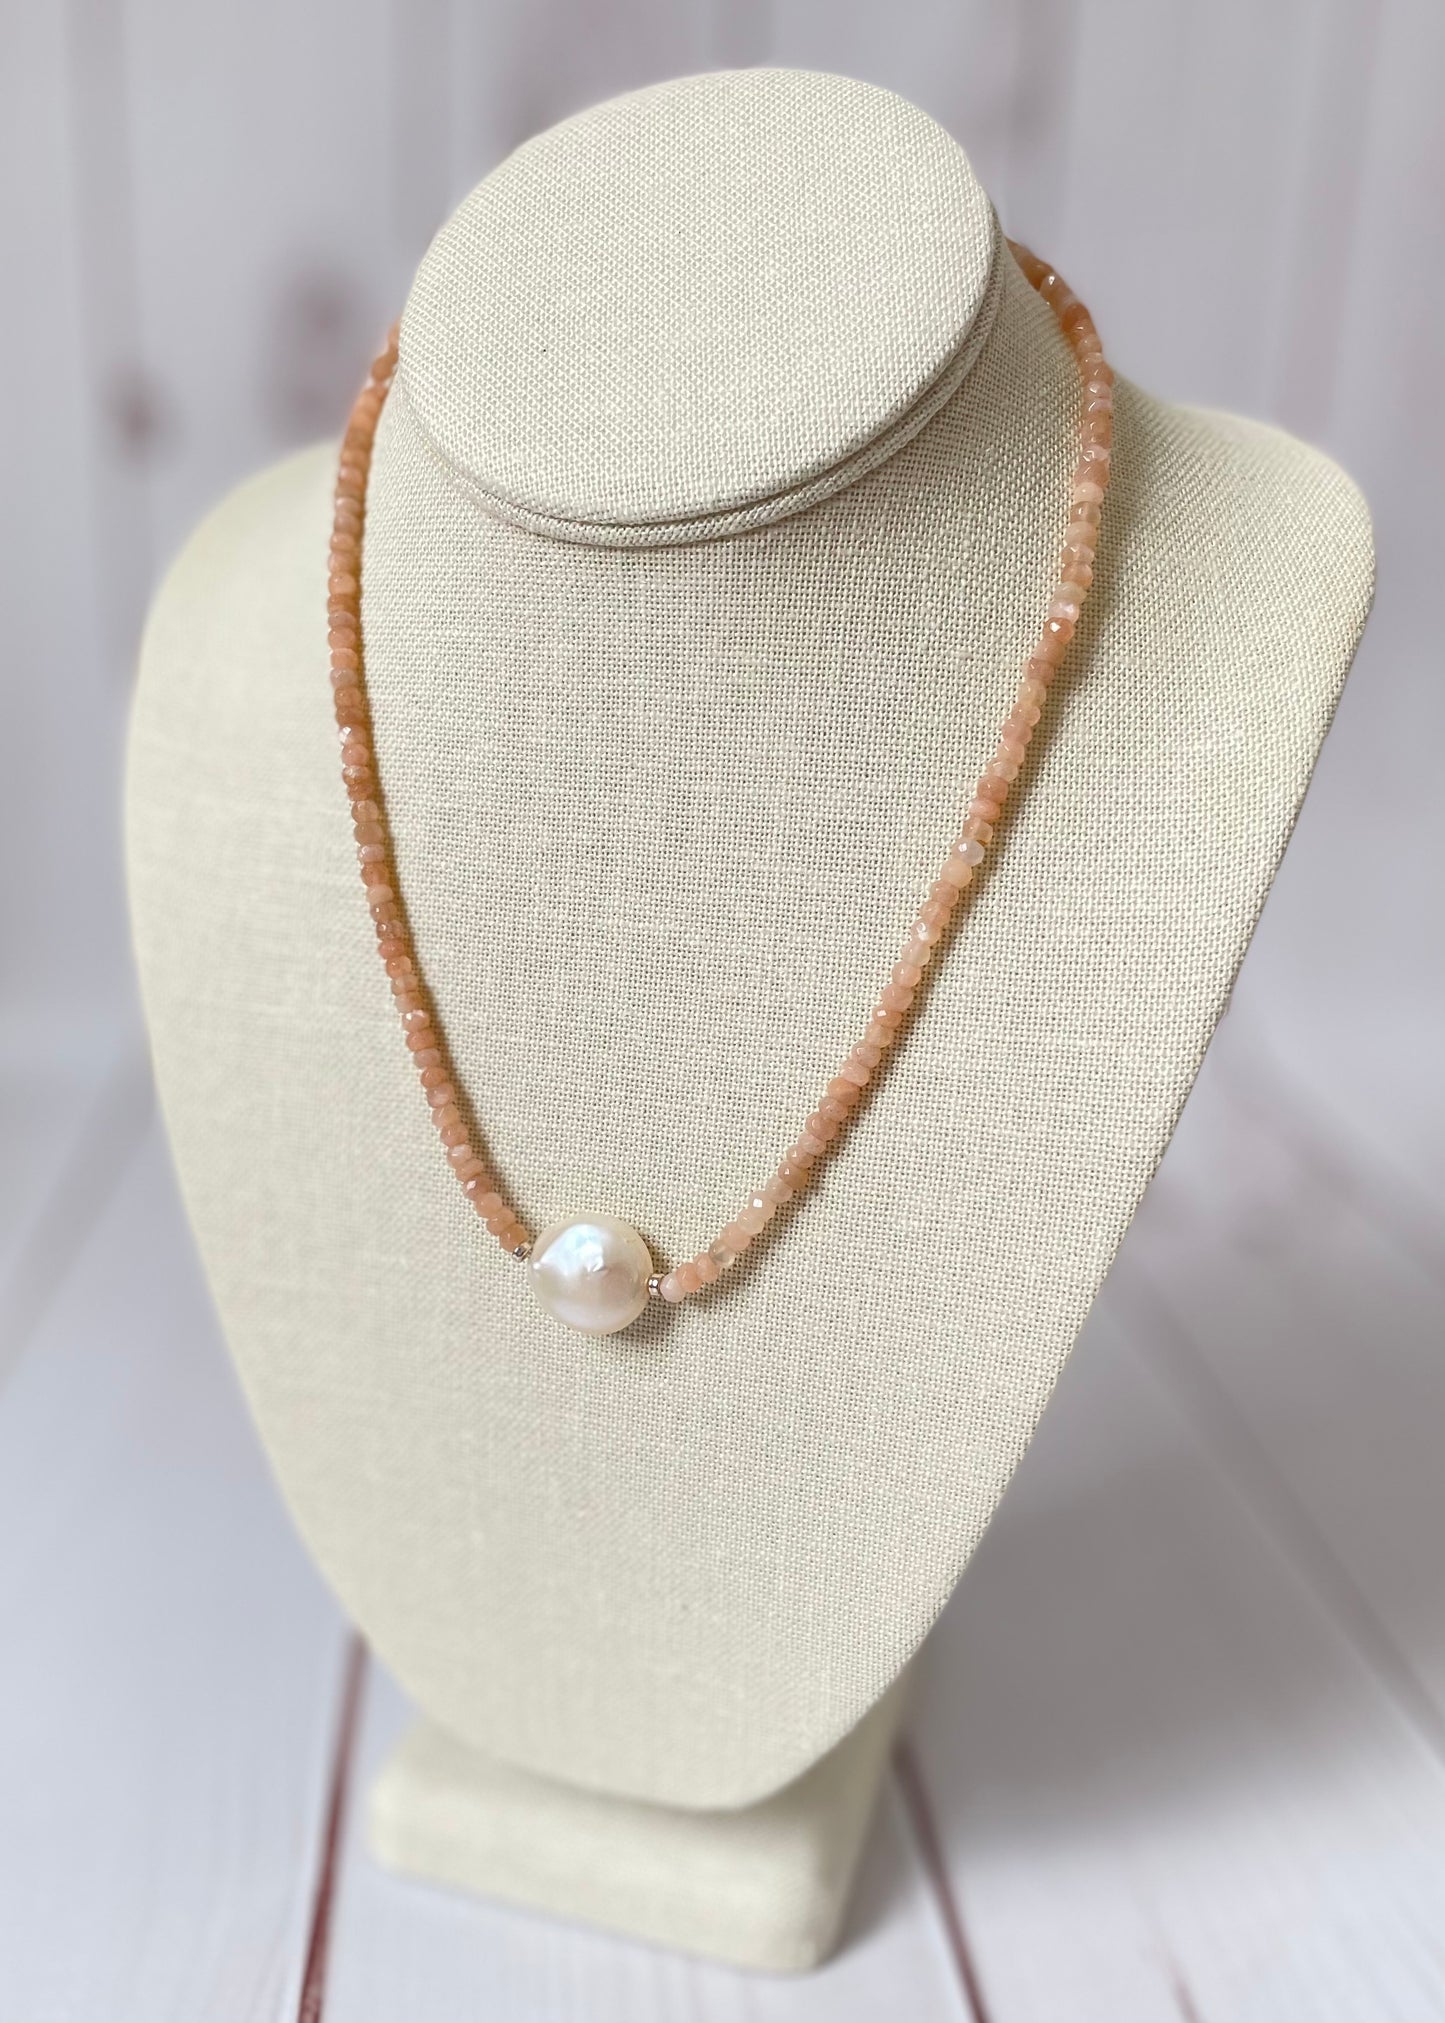 Peach Moonstone and Coin Pearl Necklace 18"